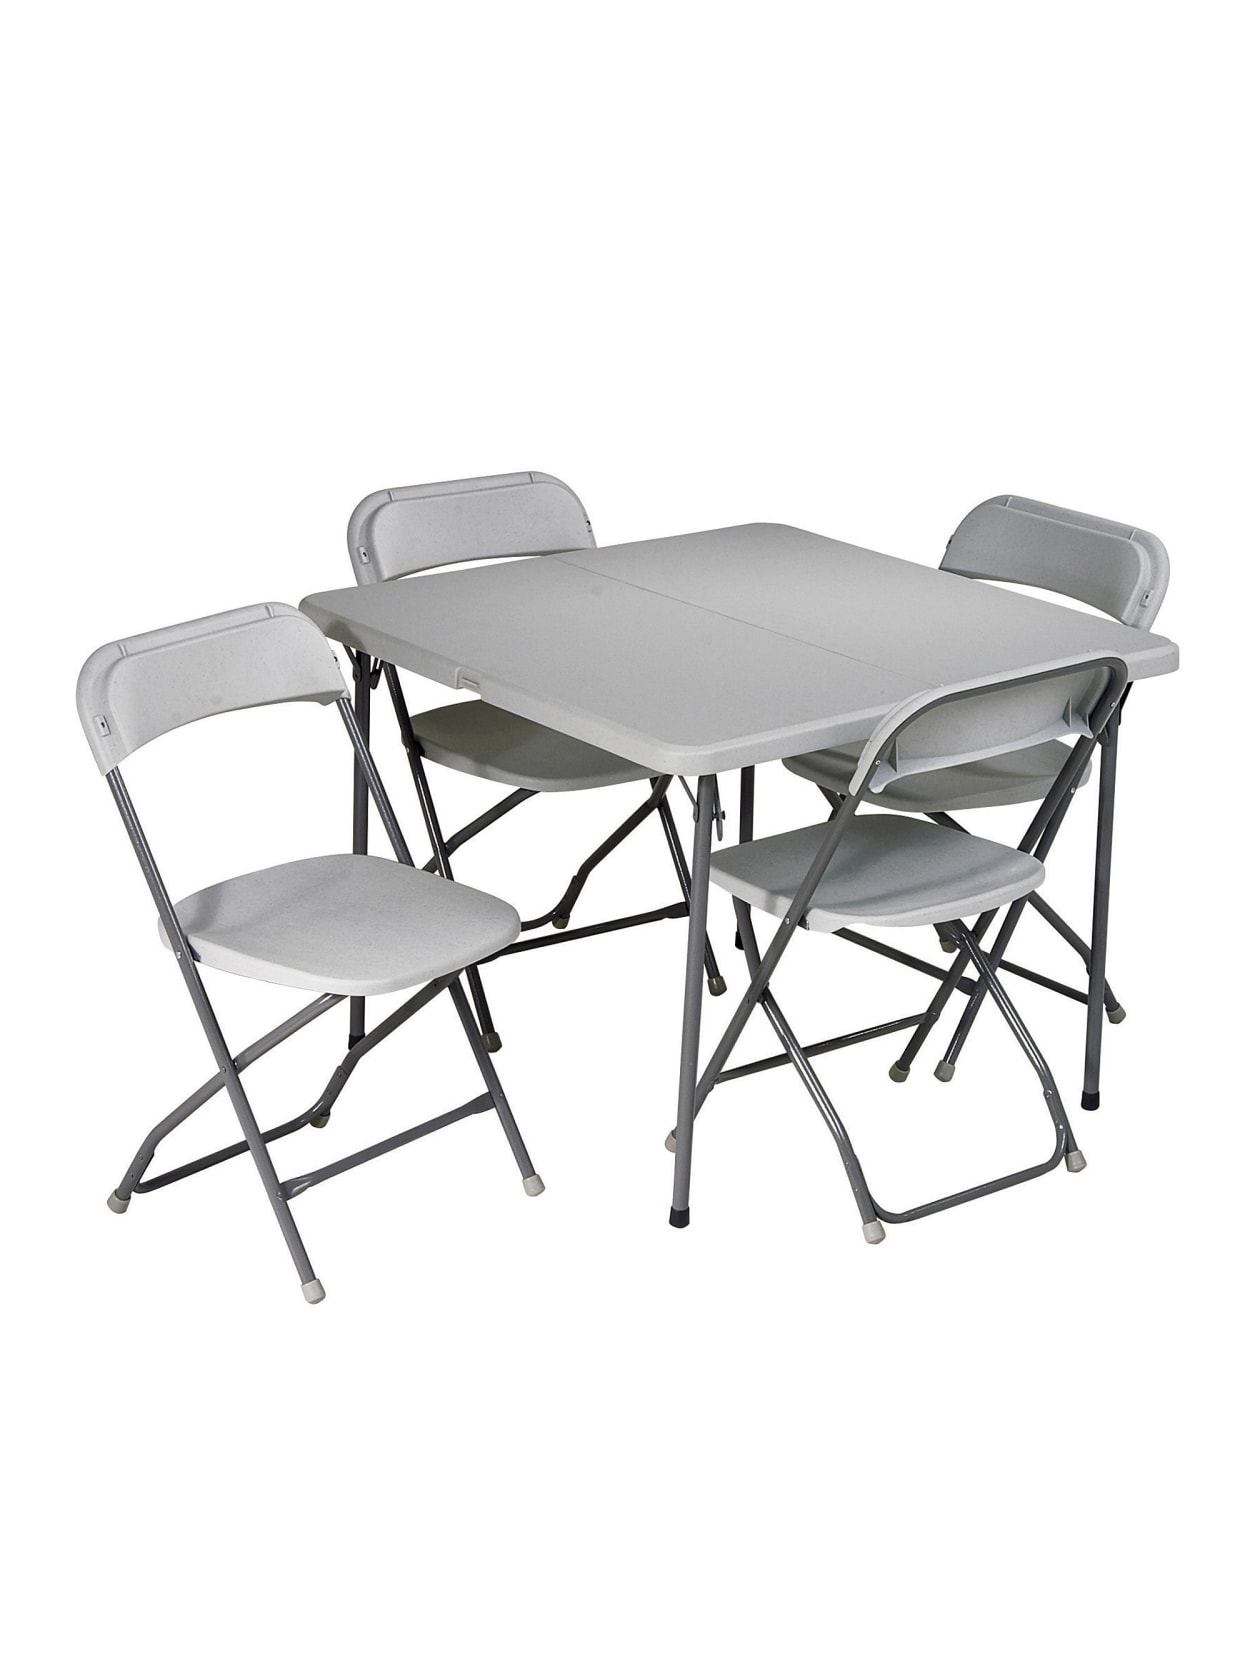 walmart kids folding table and chairs